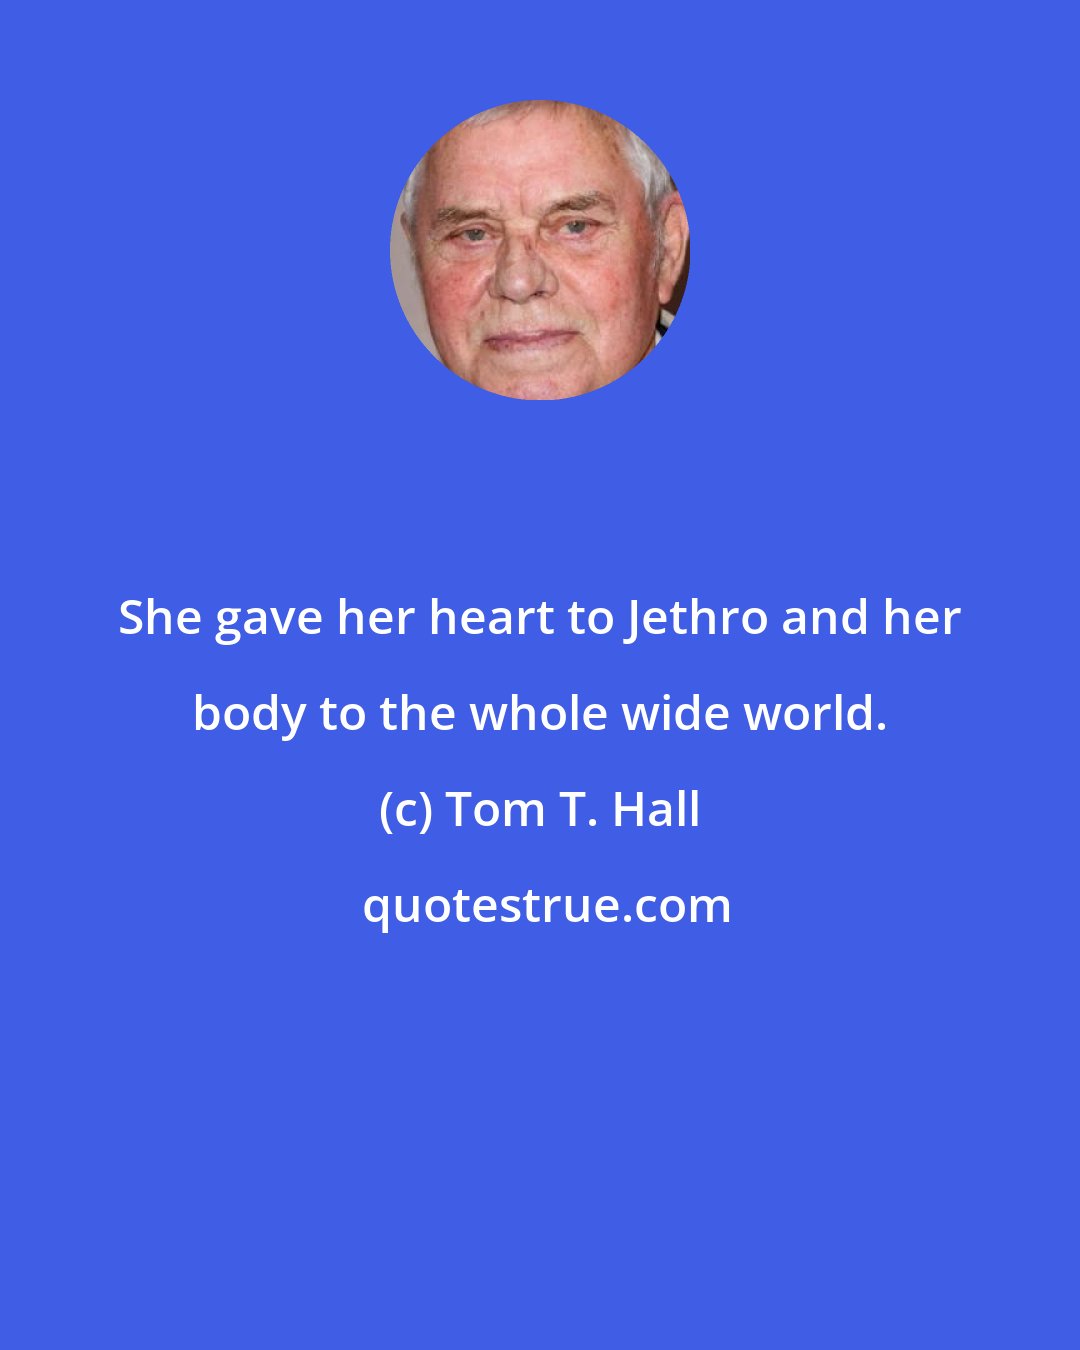 Tom T. Hall: She gave her heart to Jethro and her body to the whole wide world.